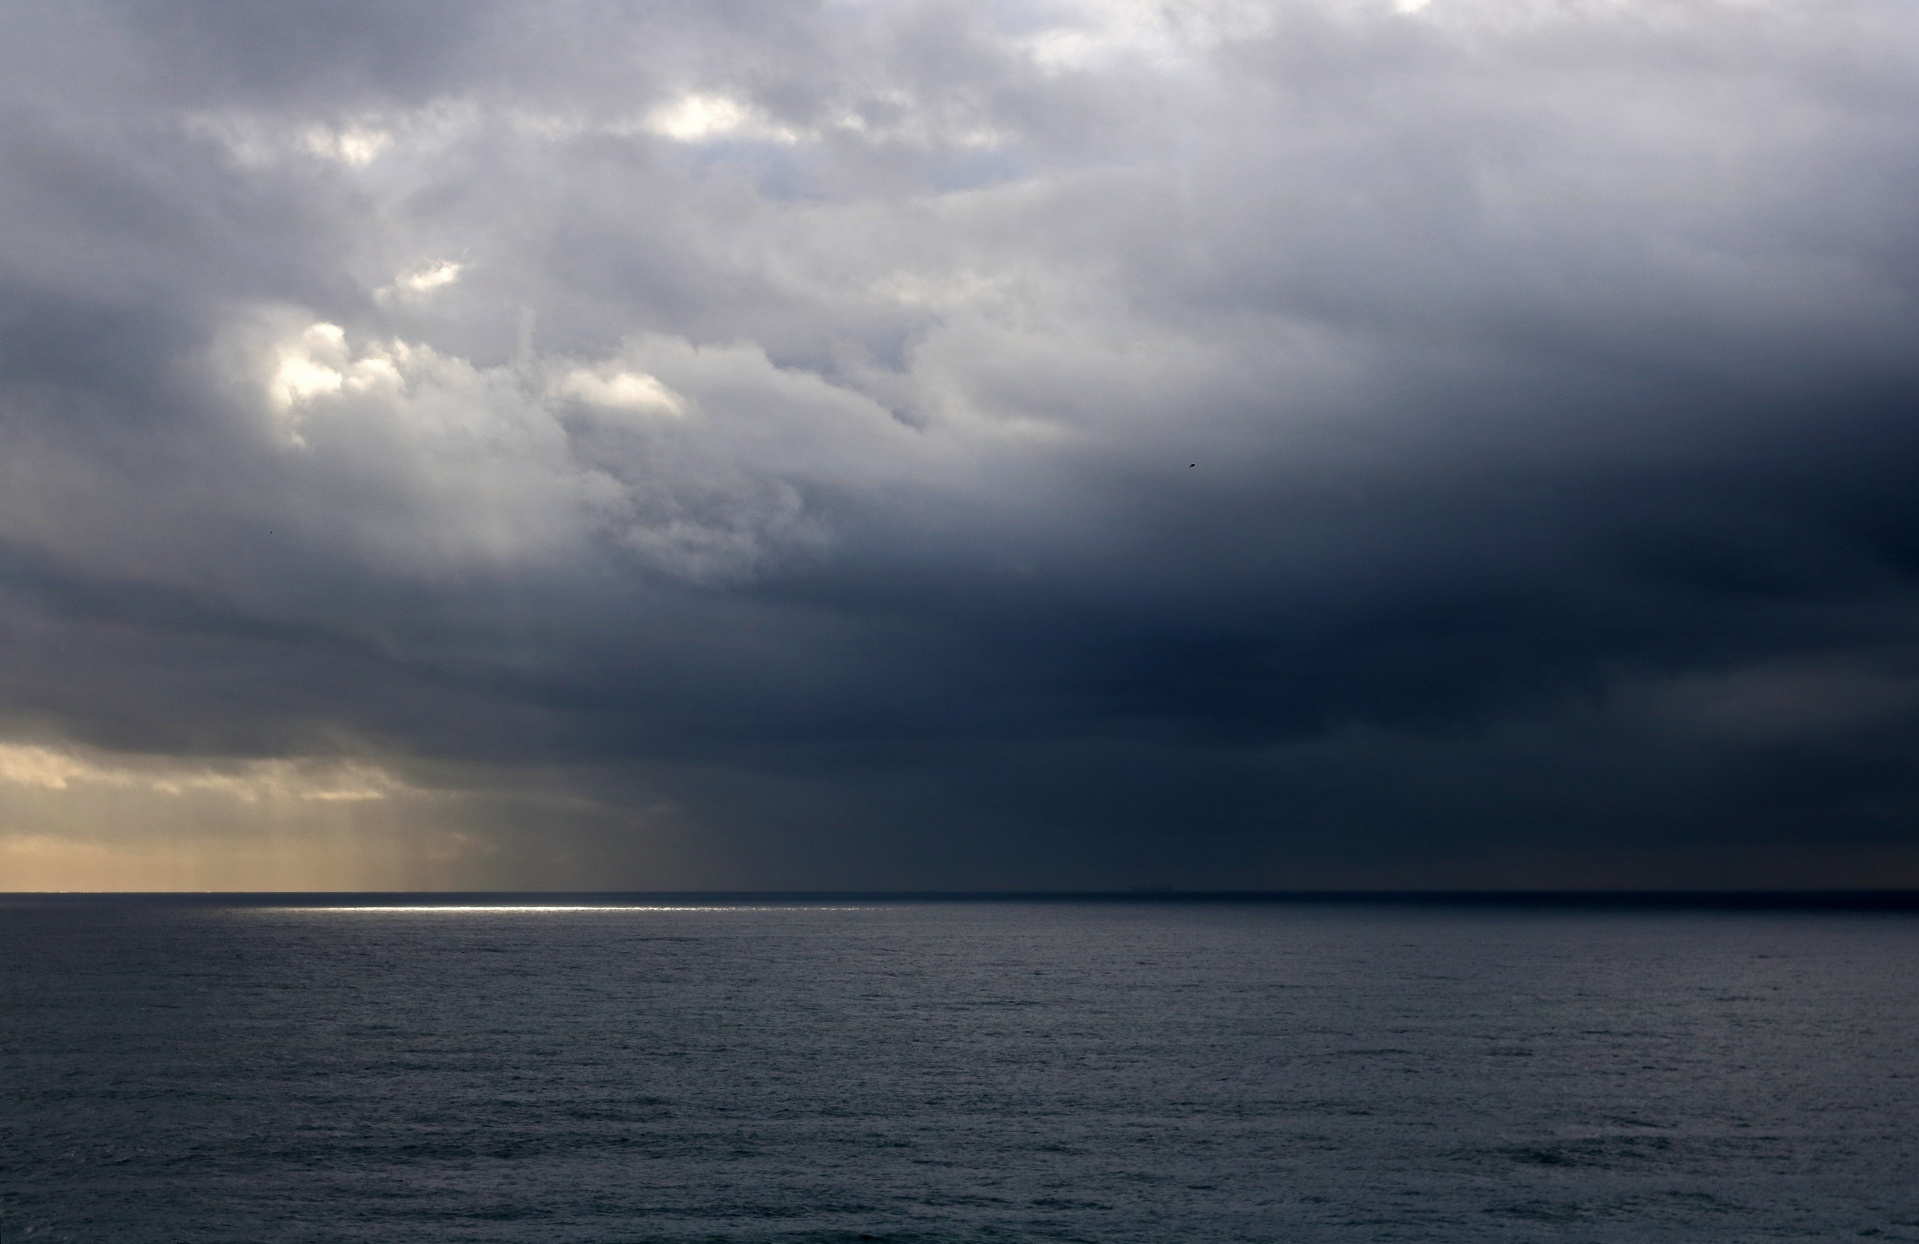 a thin sliver of light reflecting on the ocean through heavy cloud